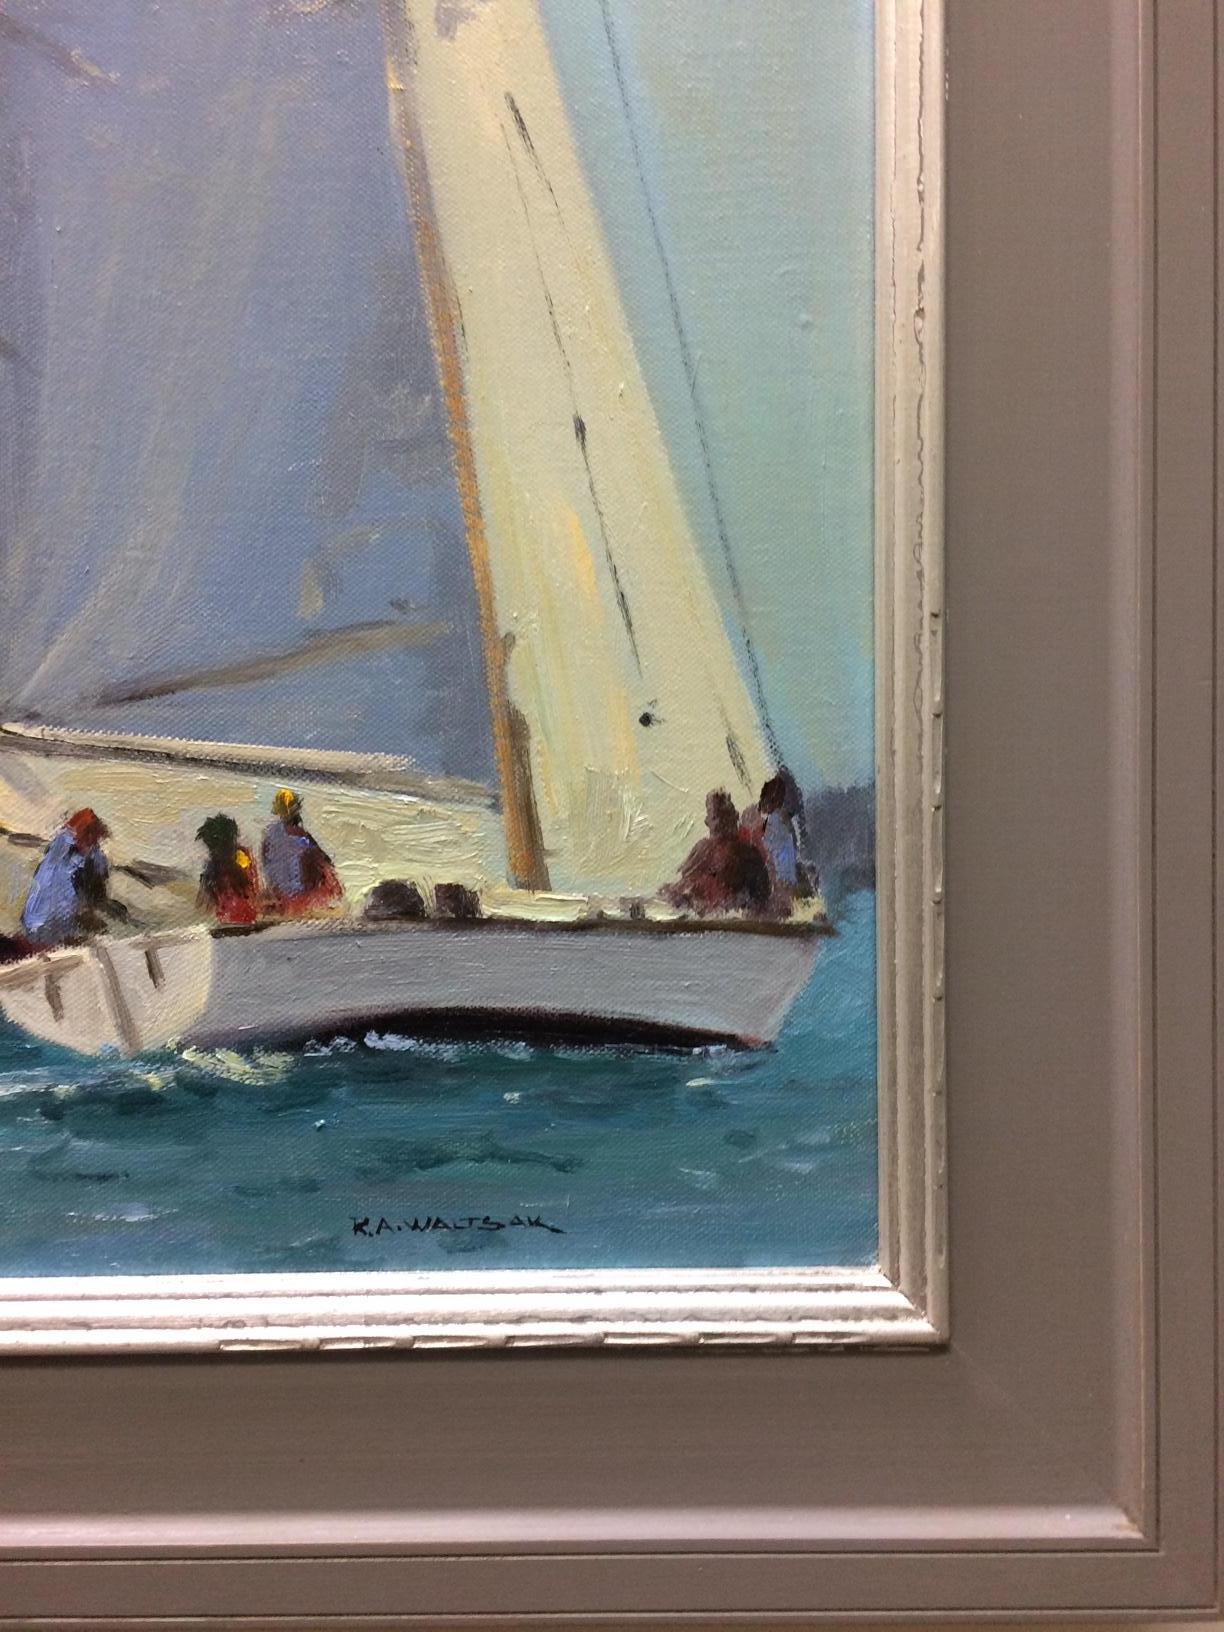 And the races are underway, the crew clutching the lines with expertise, the sun beating down as the sails catch the wind.  The clear blue sky meets the equally blue calm waters making this one a regatta to remember!  Artist Robert Waltsak creates